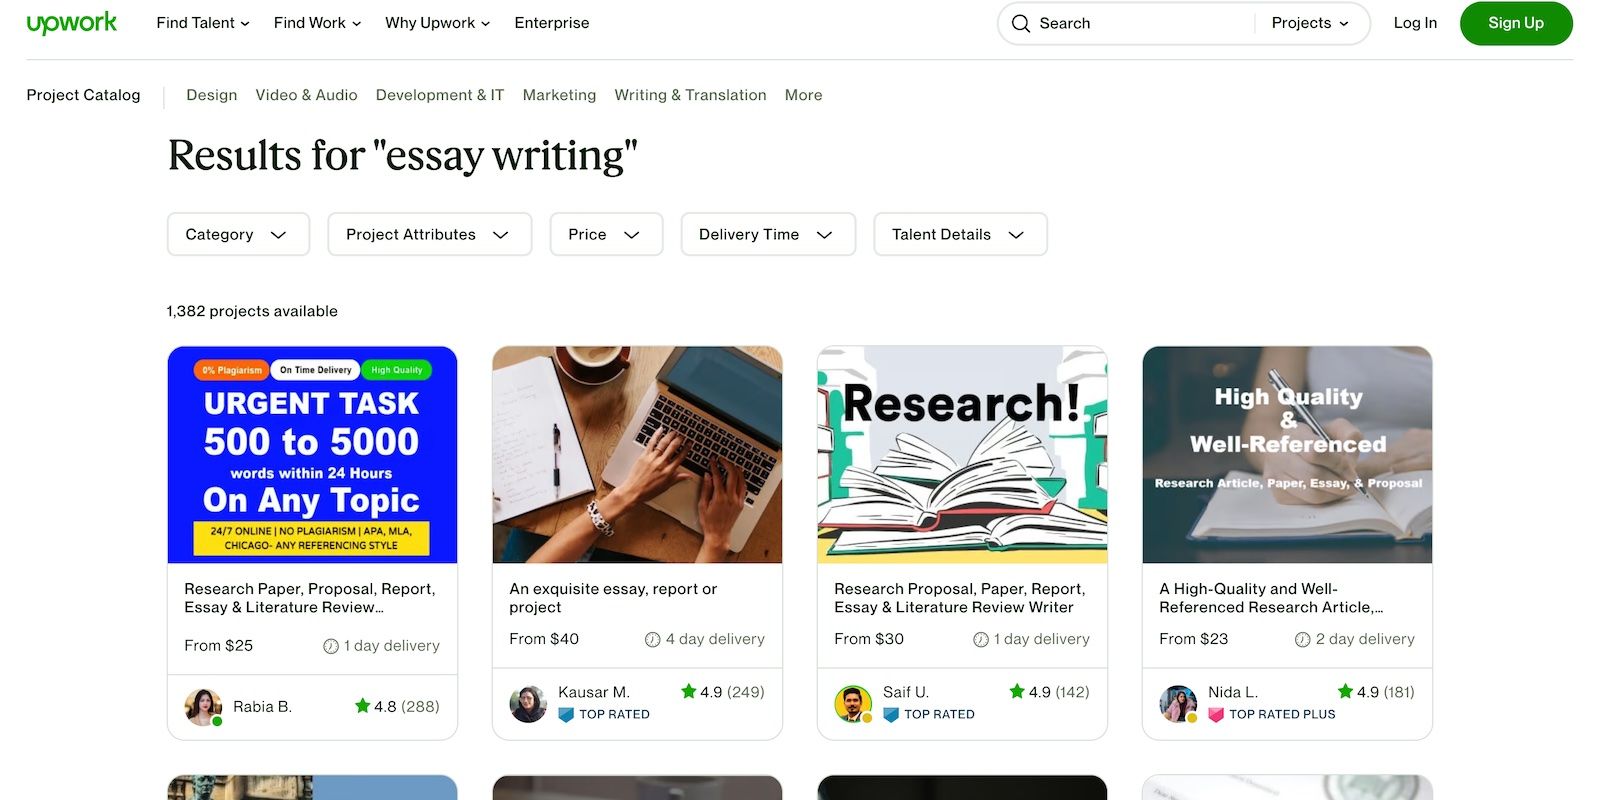 Searching Essay Writing Jobs on Upwork